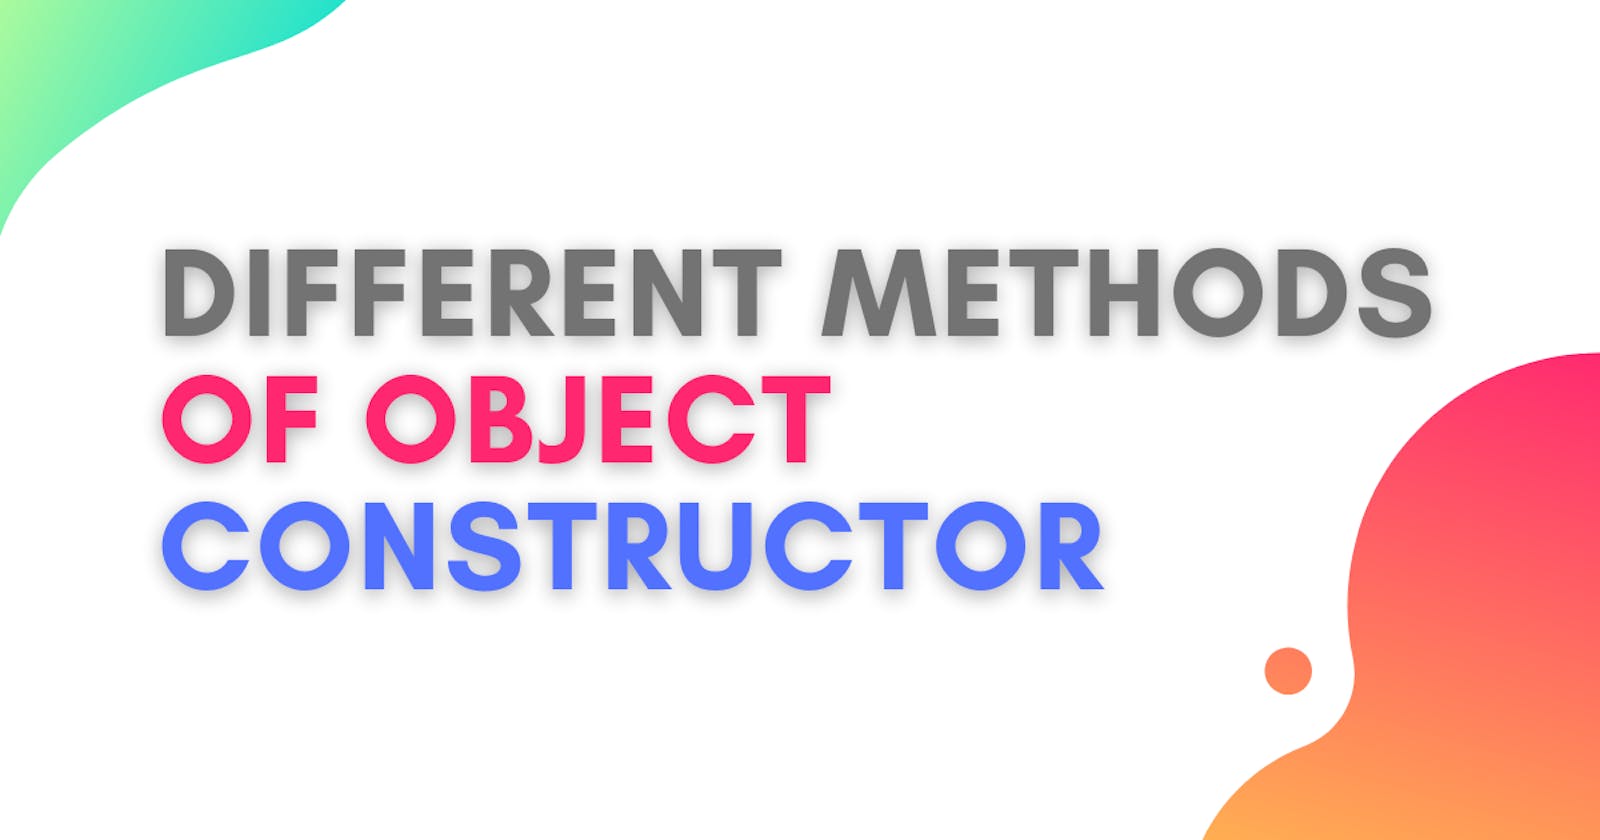 What are different method of object constructor?